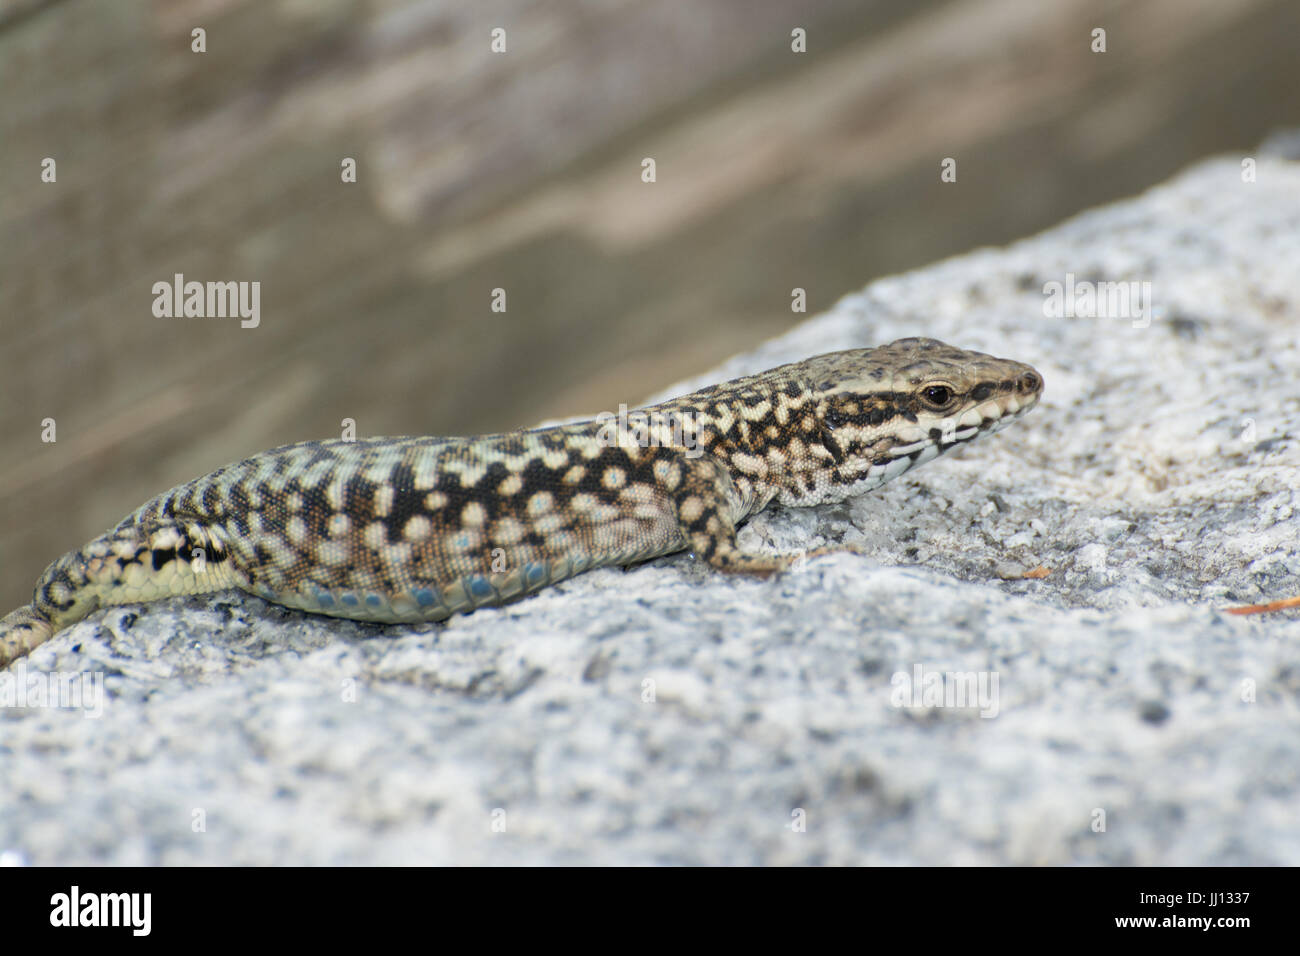 Close-up of a common wall lizard (Podarcis muralis) in France, Europe Stock Photo